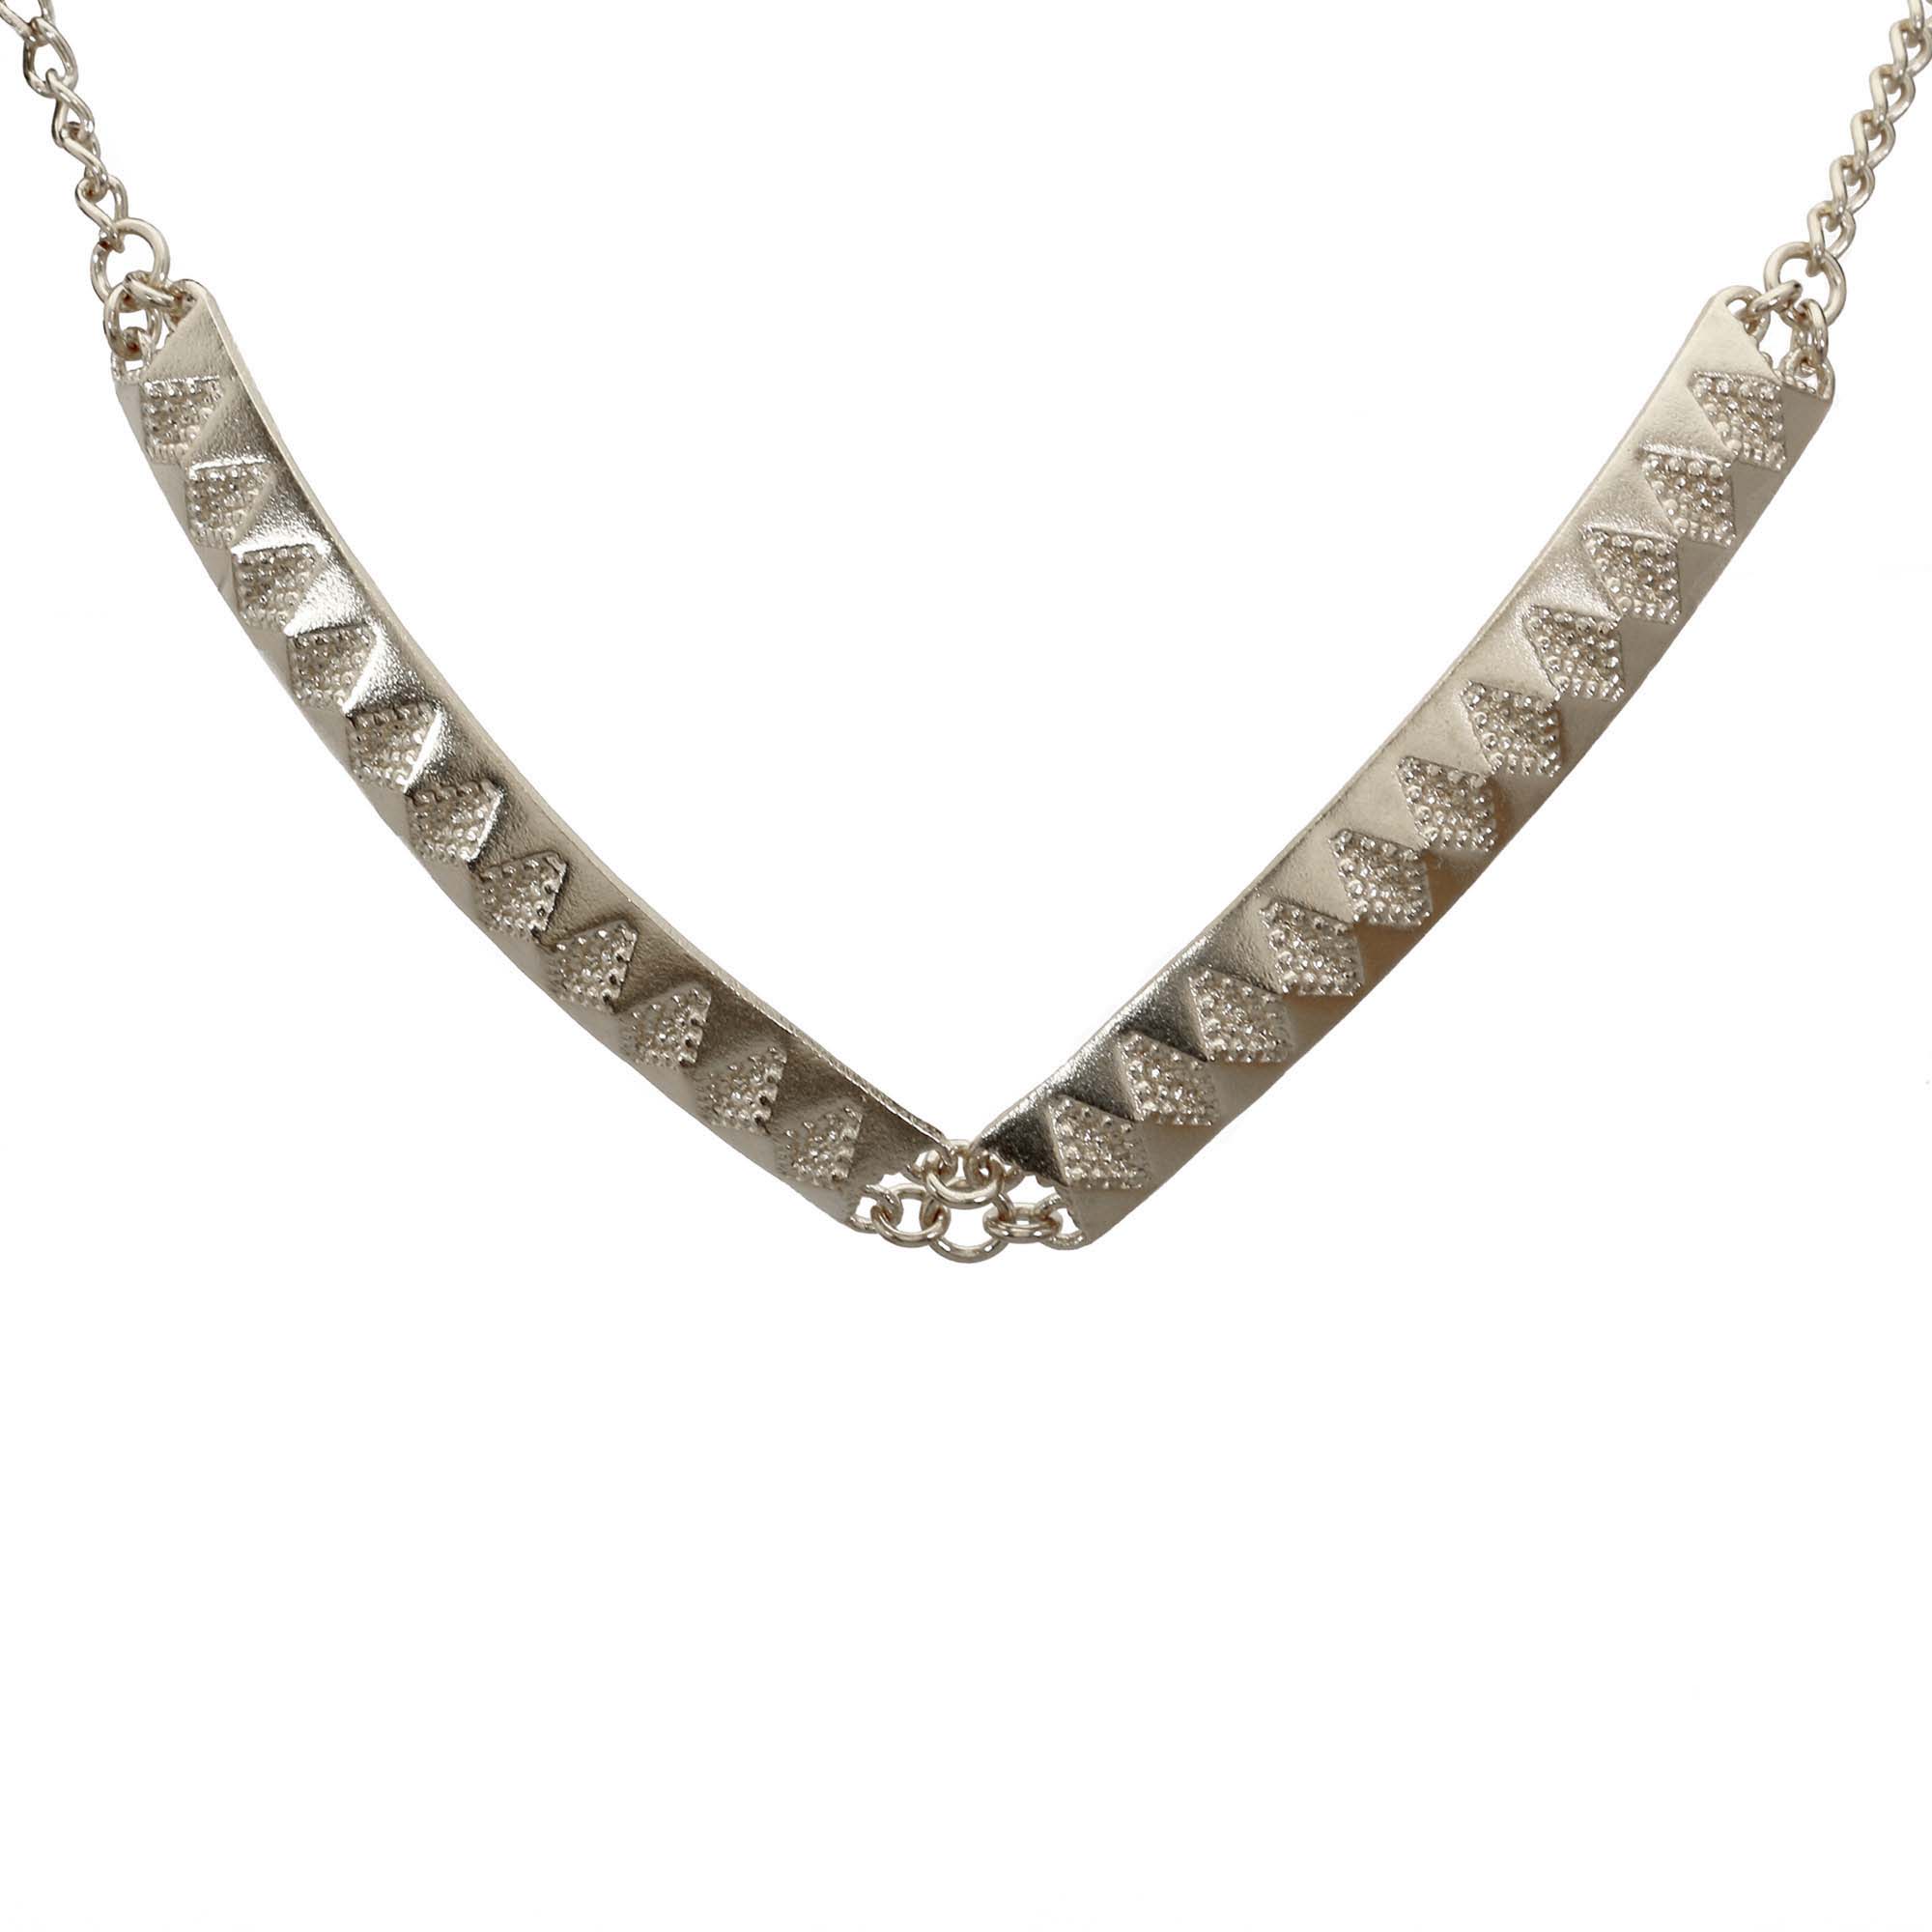 Chasm sterling silver chunky necklace with diamond imprint pattern